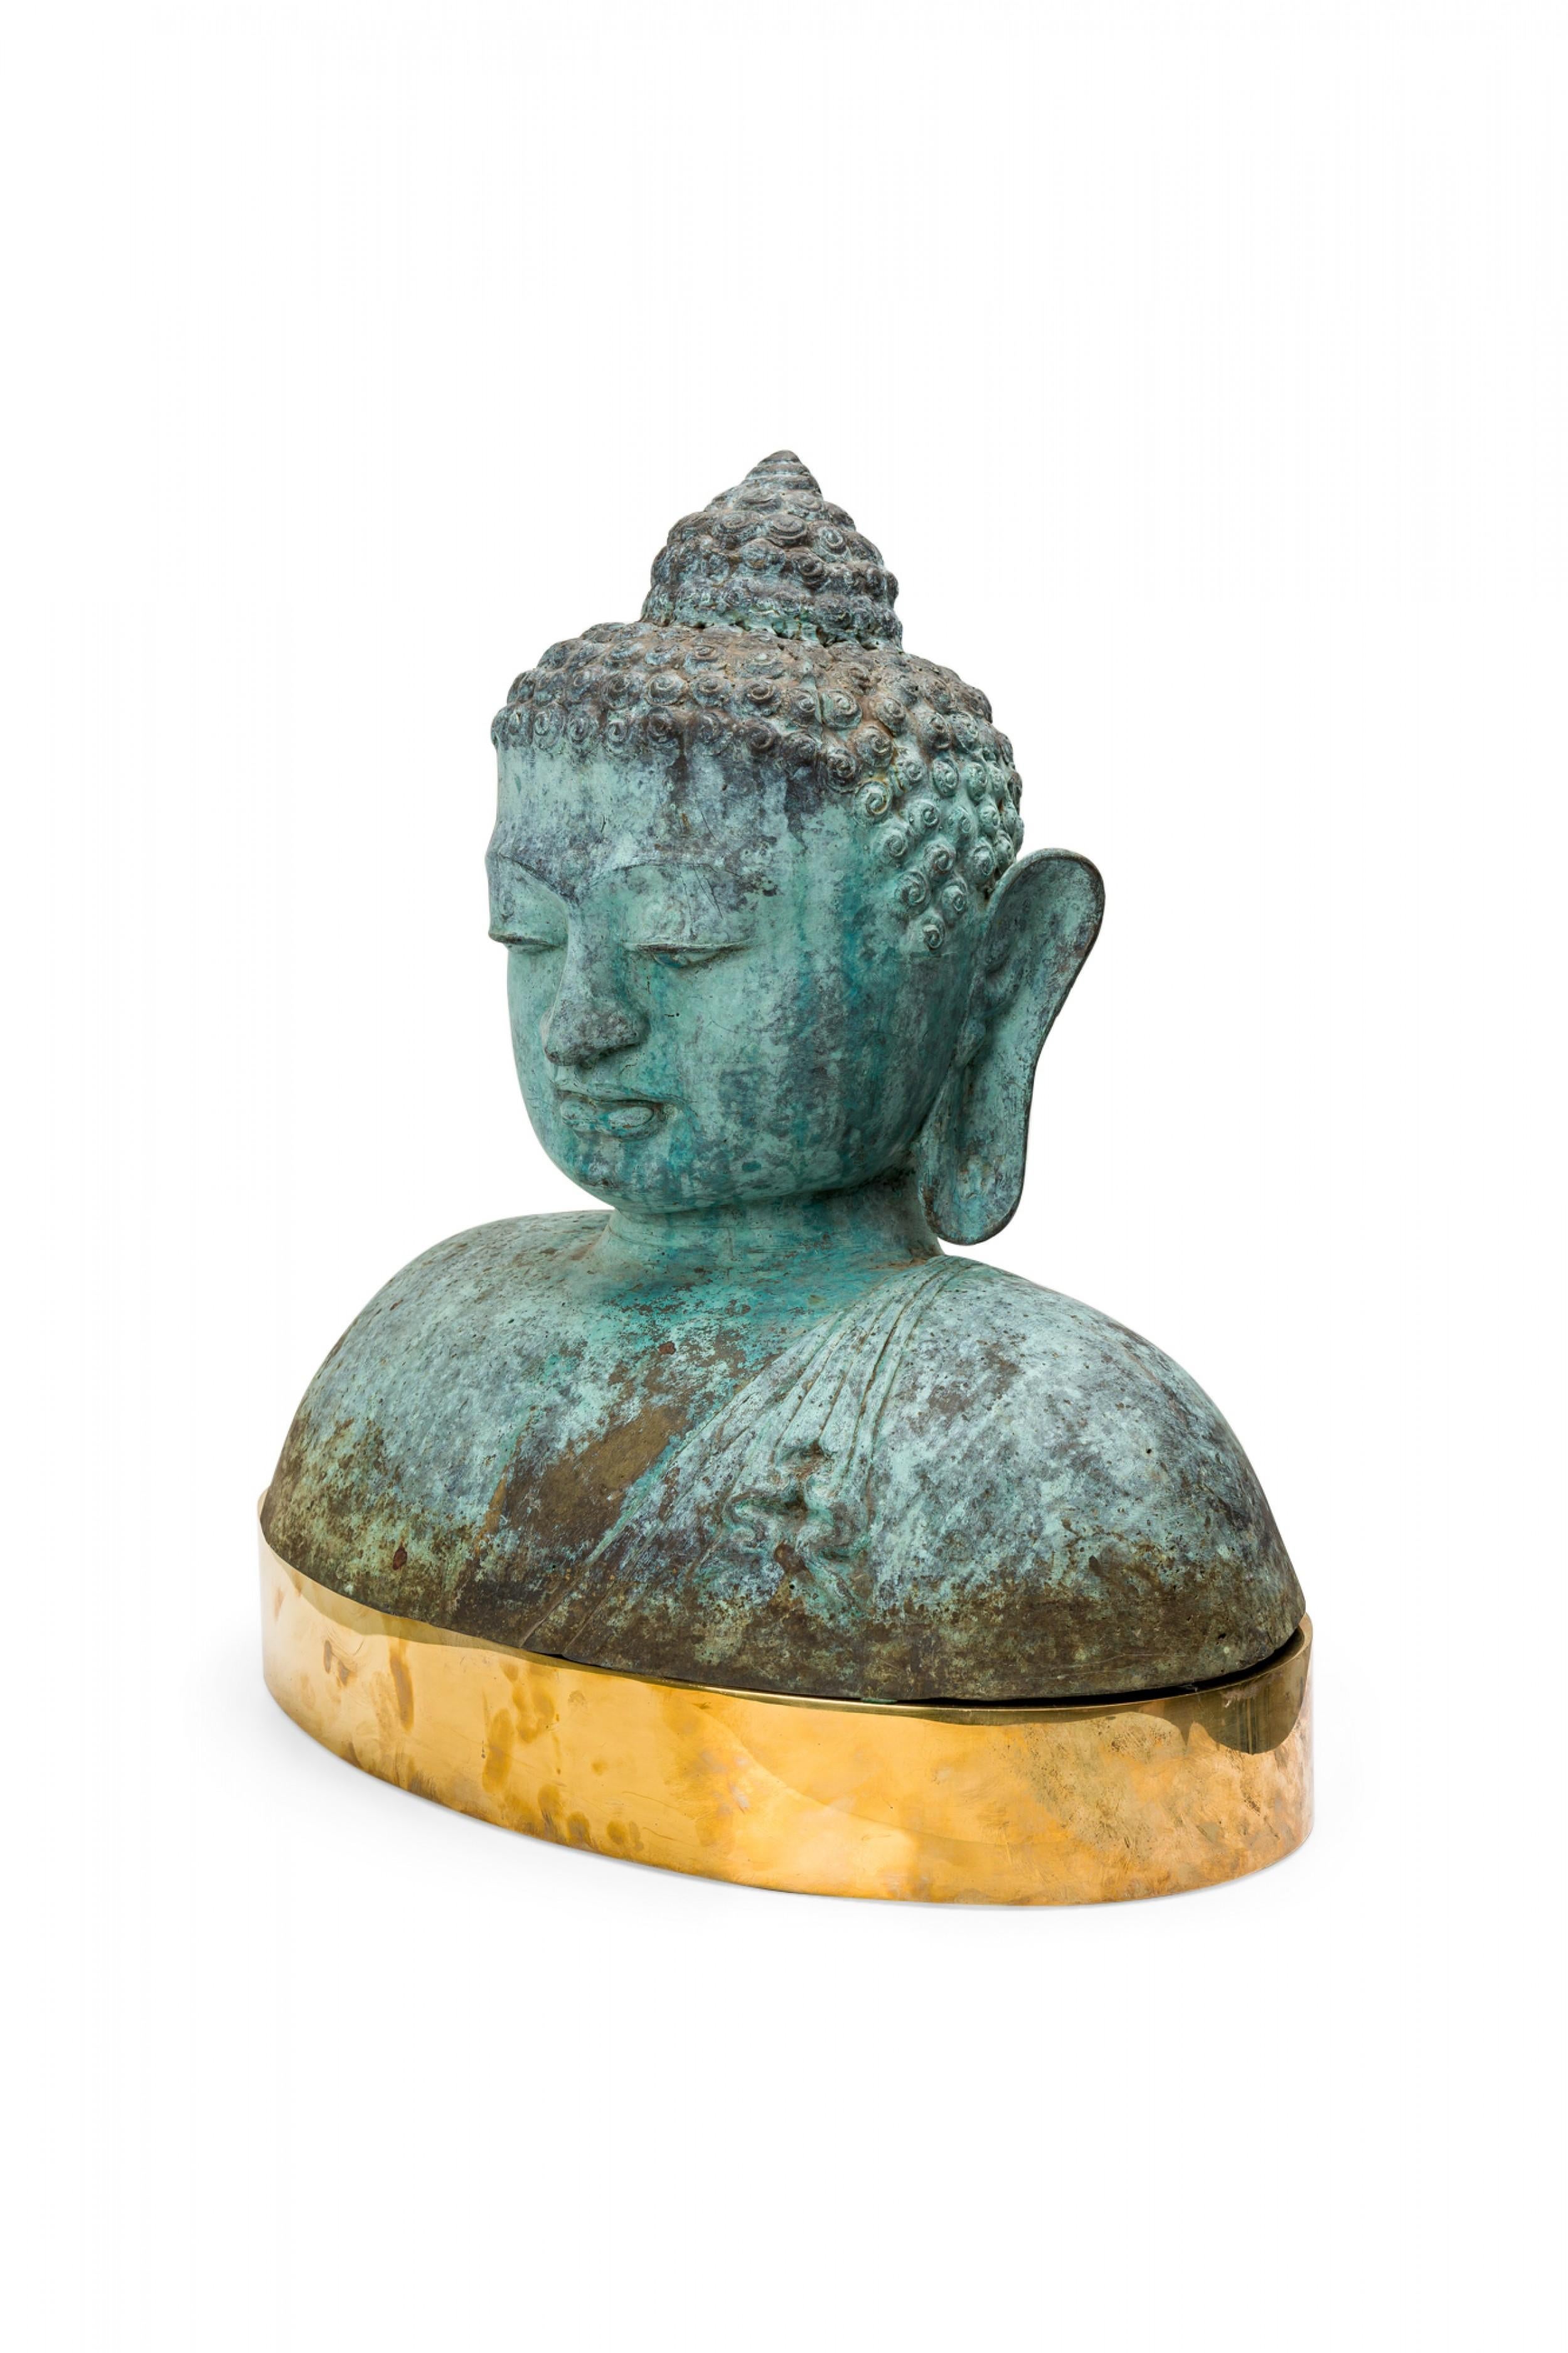 Vintage Tibetan bronze figural bust of the Buddha with a natural green patina, resting on an oval polished brass plinth.